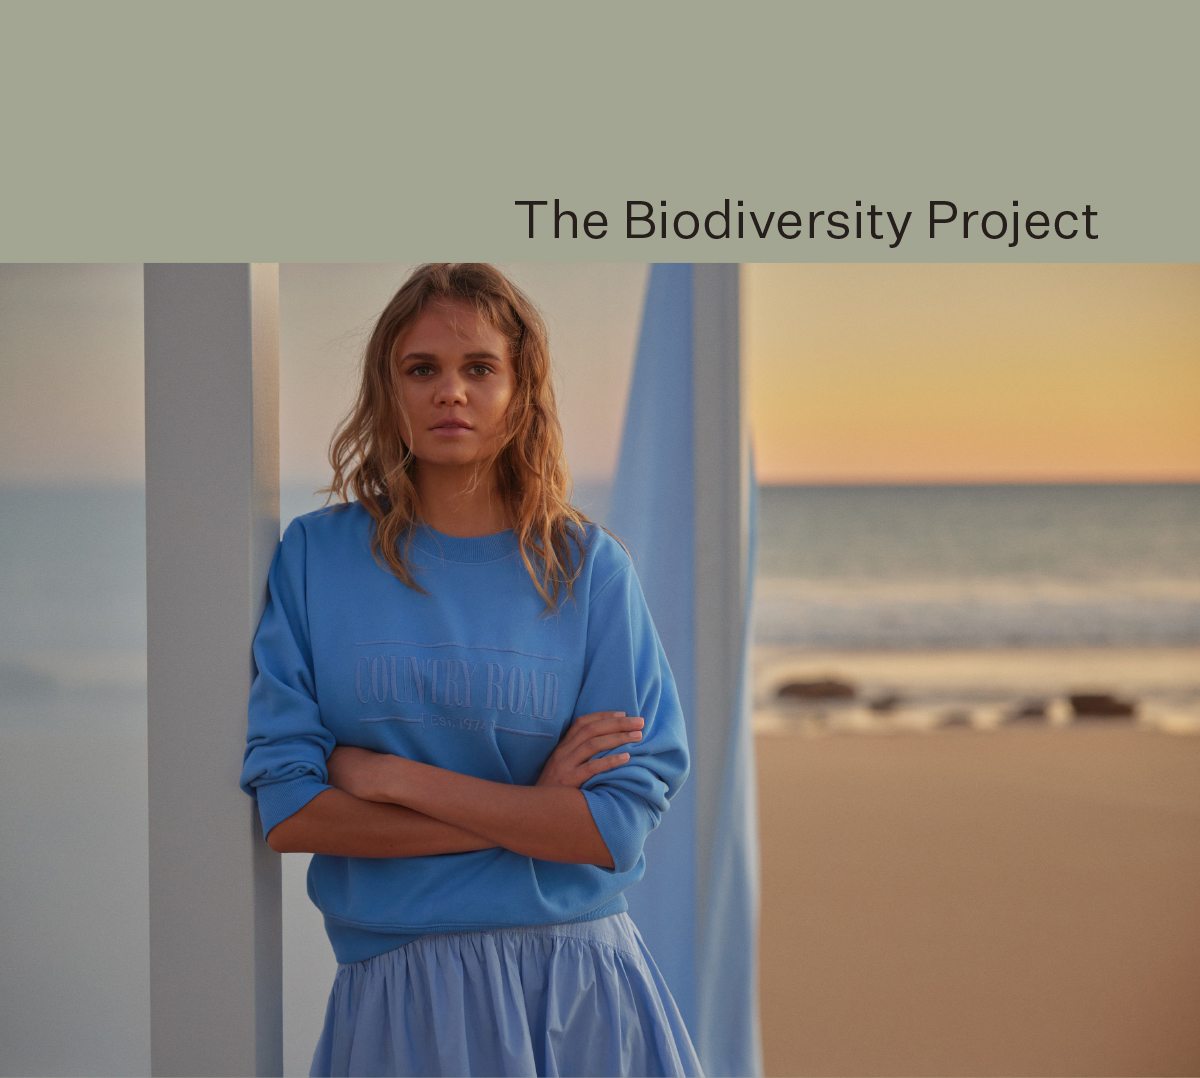 The Biodiversity Project